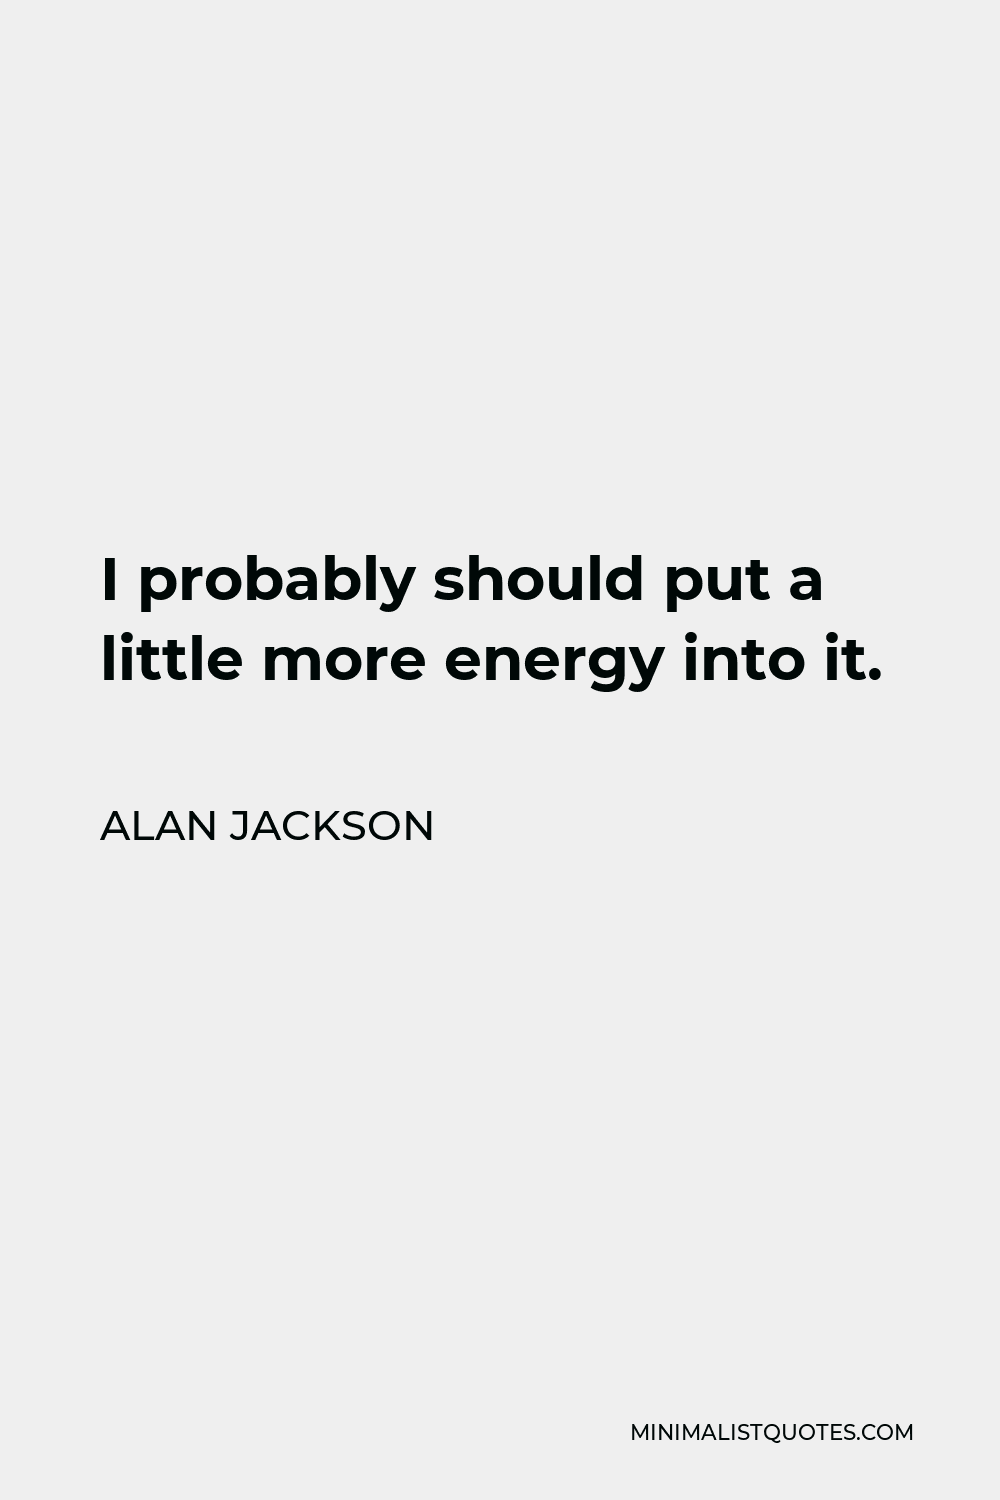 Alan Jackson Quote - I probably should put a little more energy into it.